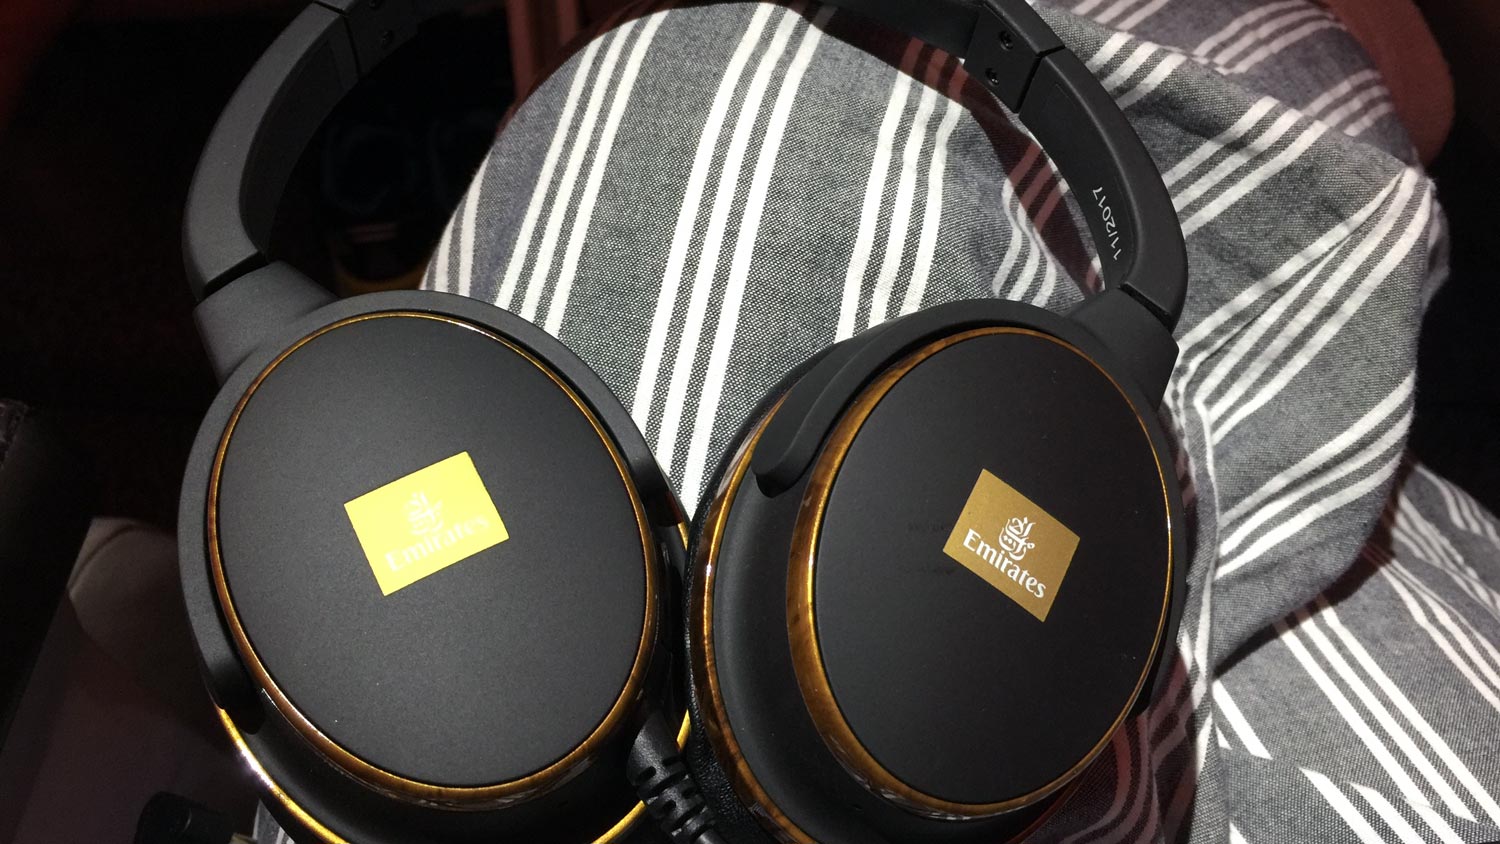 a pair of black headphones on a striped fabric